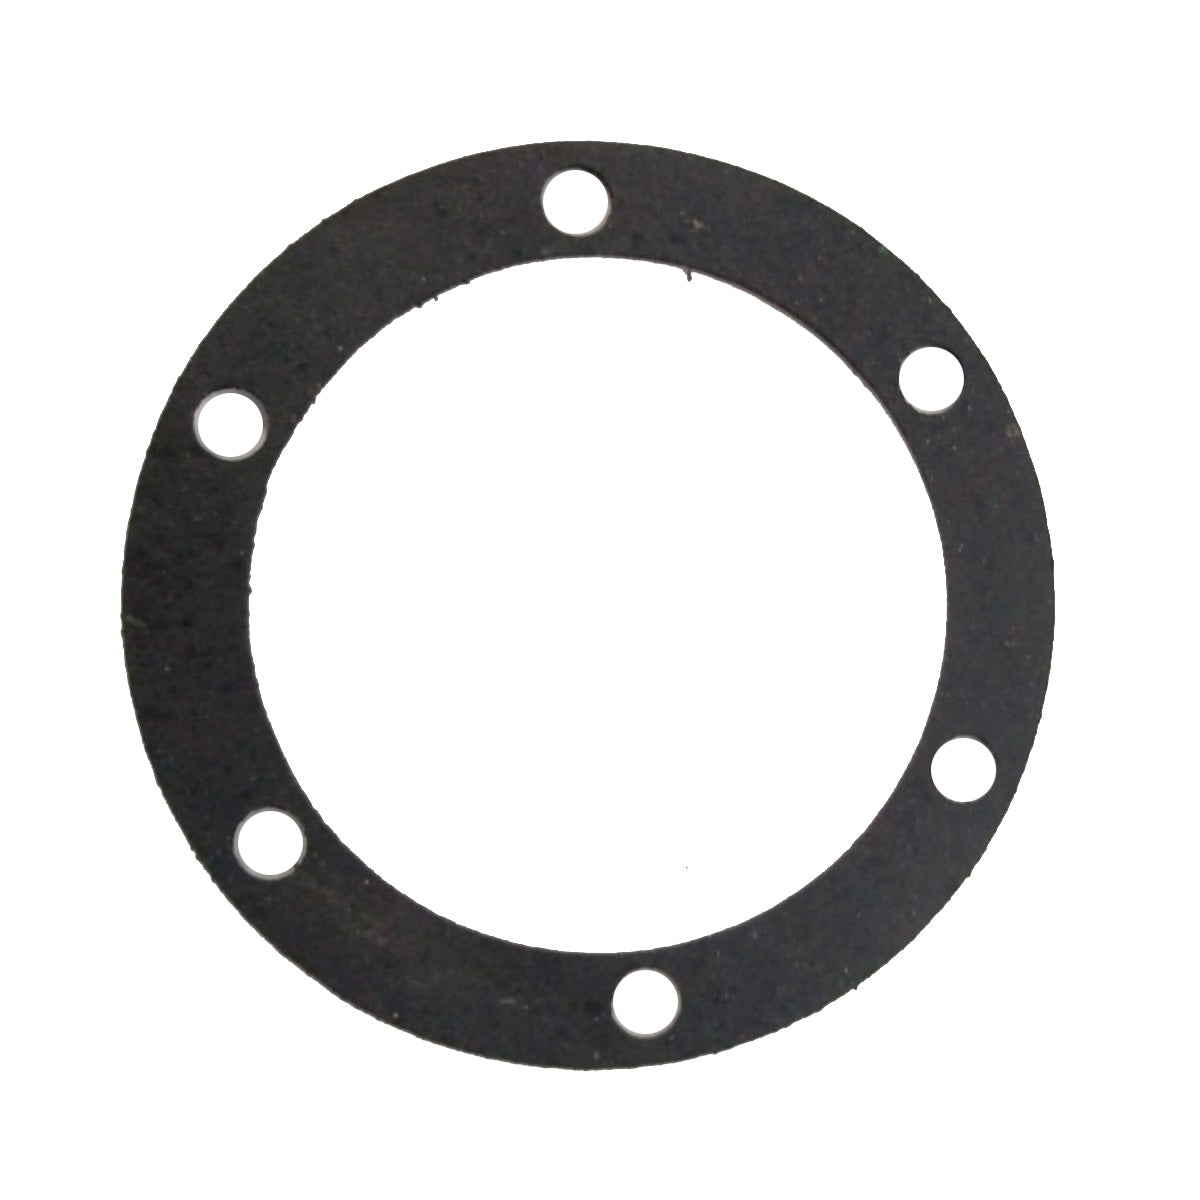 Fortpro Aluminum Steer Axle Hub Cap w/ 6 Holes and Gasket Replacement for Stemco 343-4024 | F276182